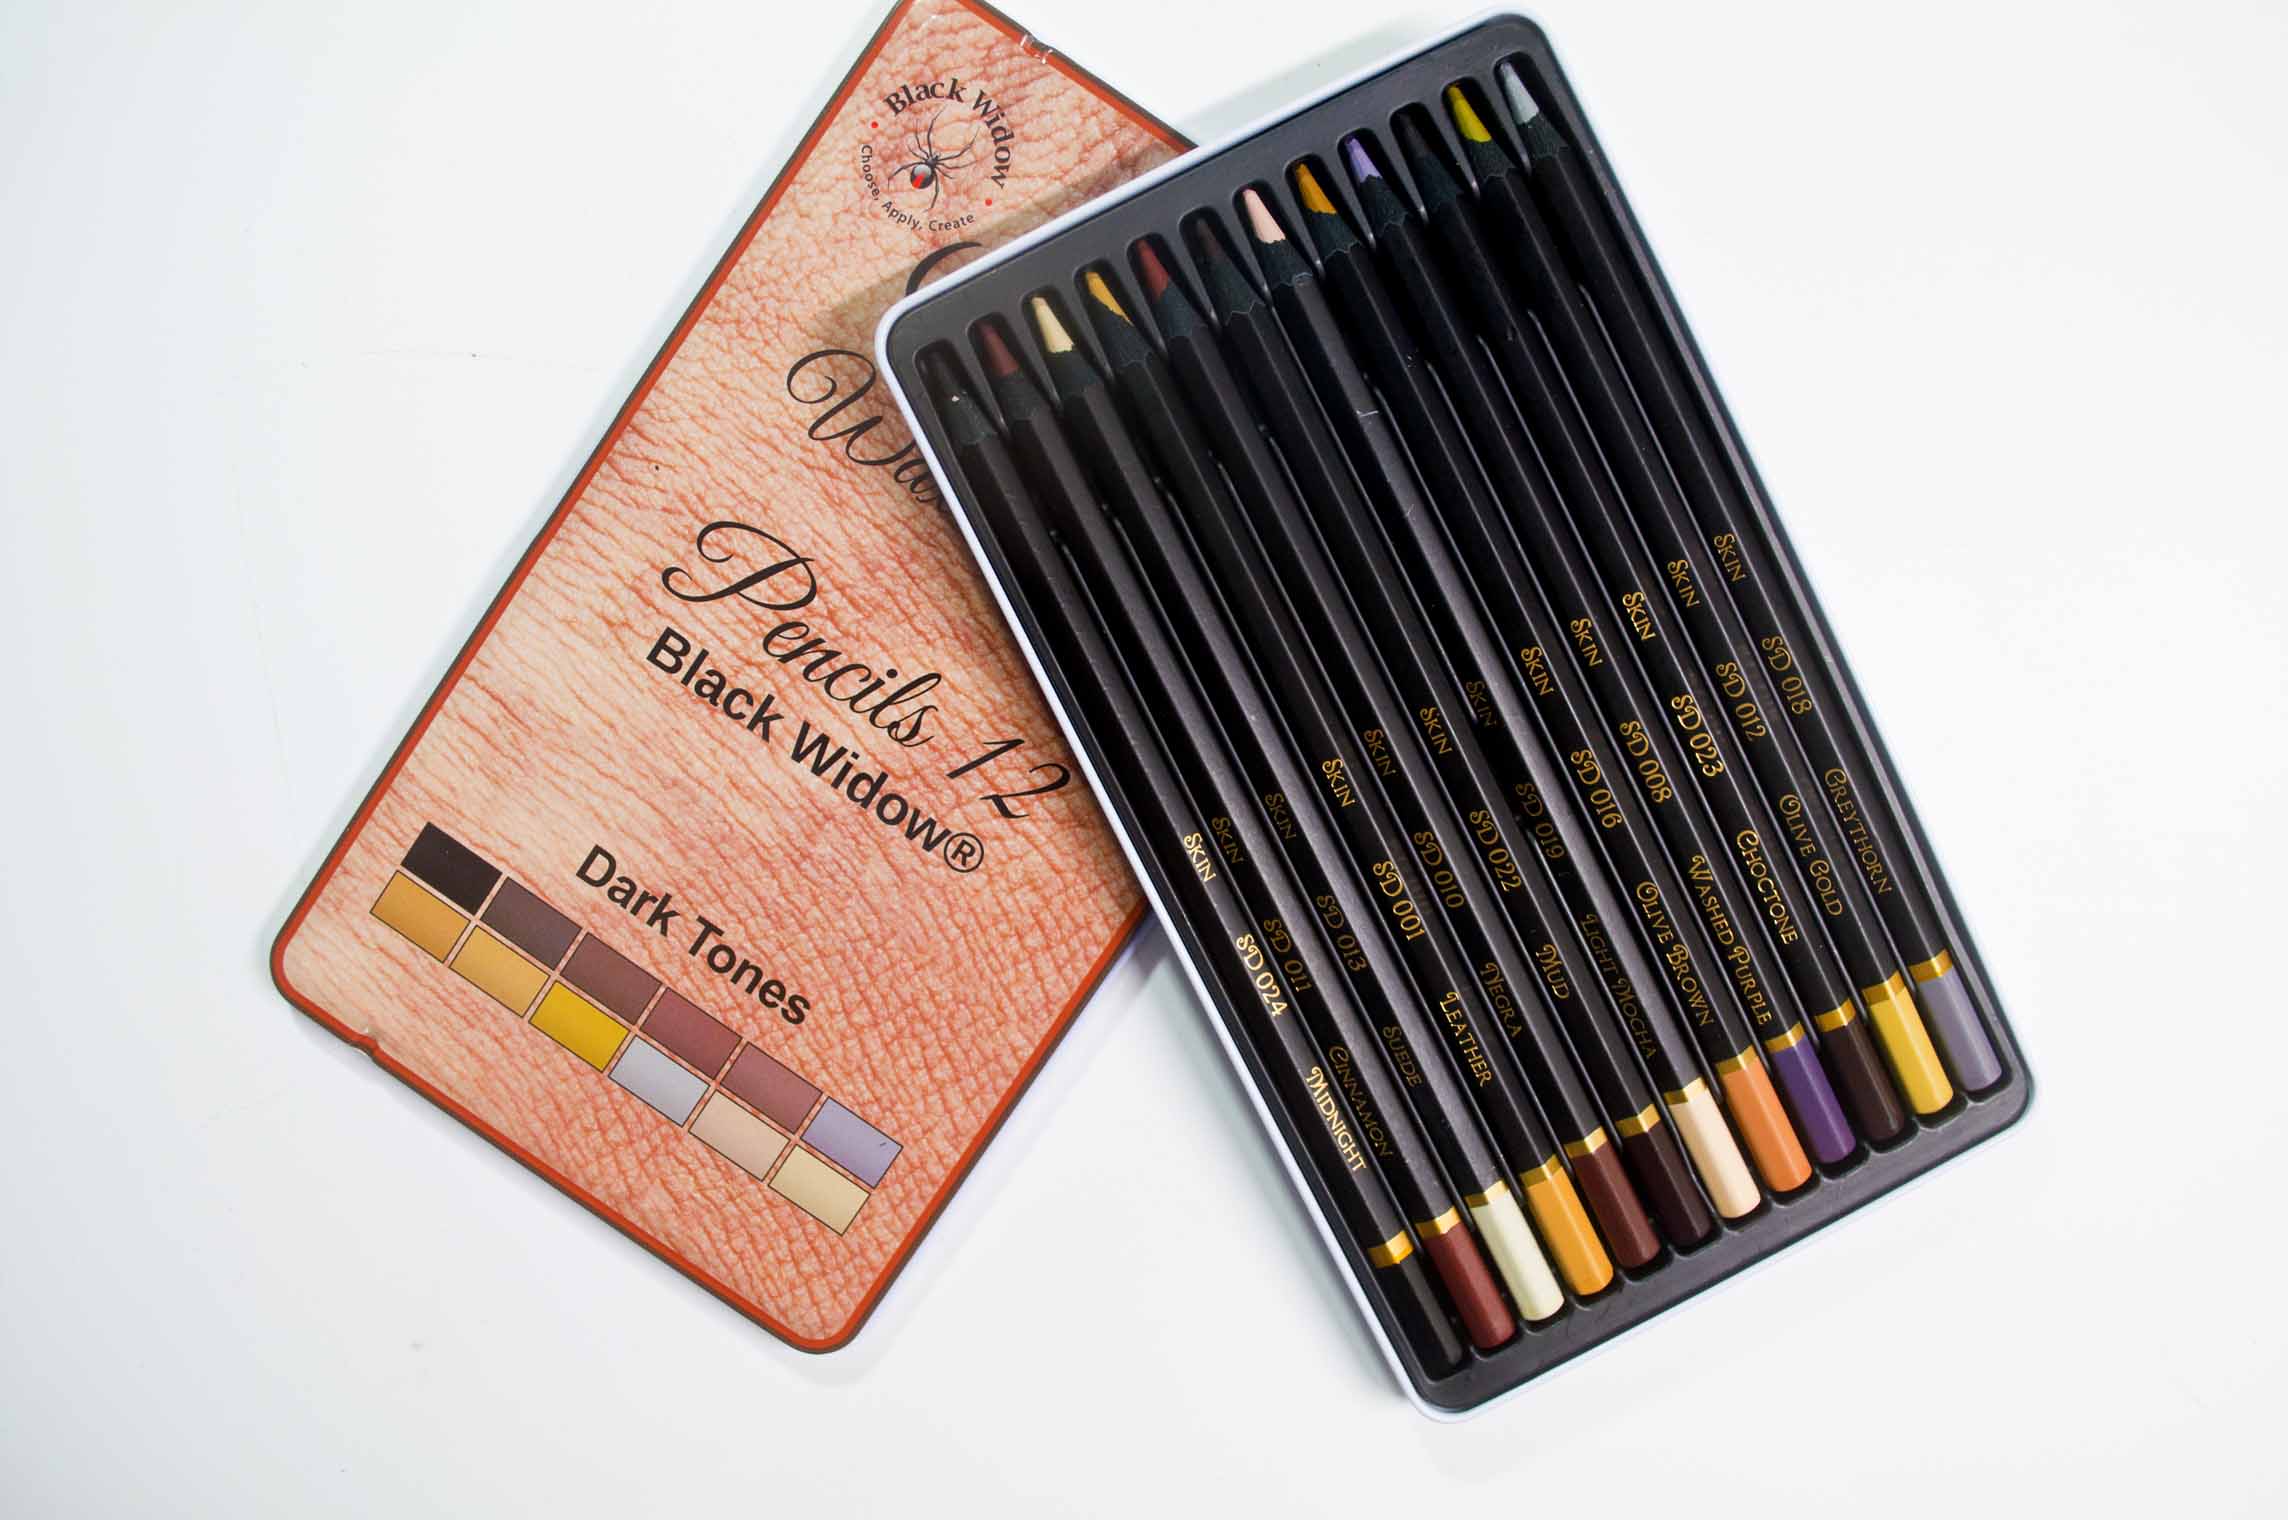 Black Widow Skin Tone Colored Pencils for Adult Coloring - Color Pencils  for Portraits and Skintone Artists - A Complete Color Range - Now With  Light Fast Ratings. 